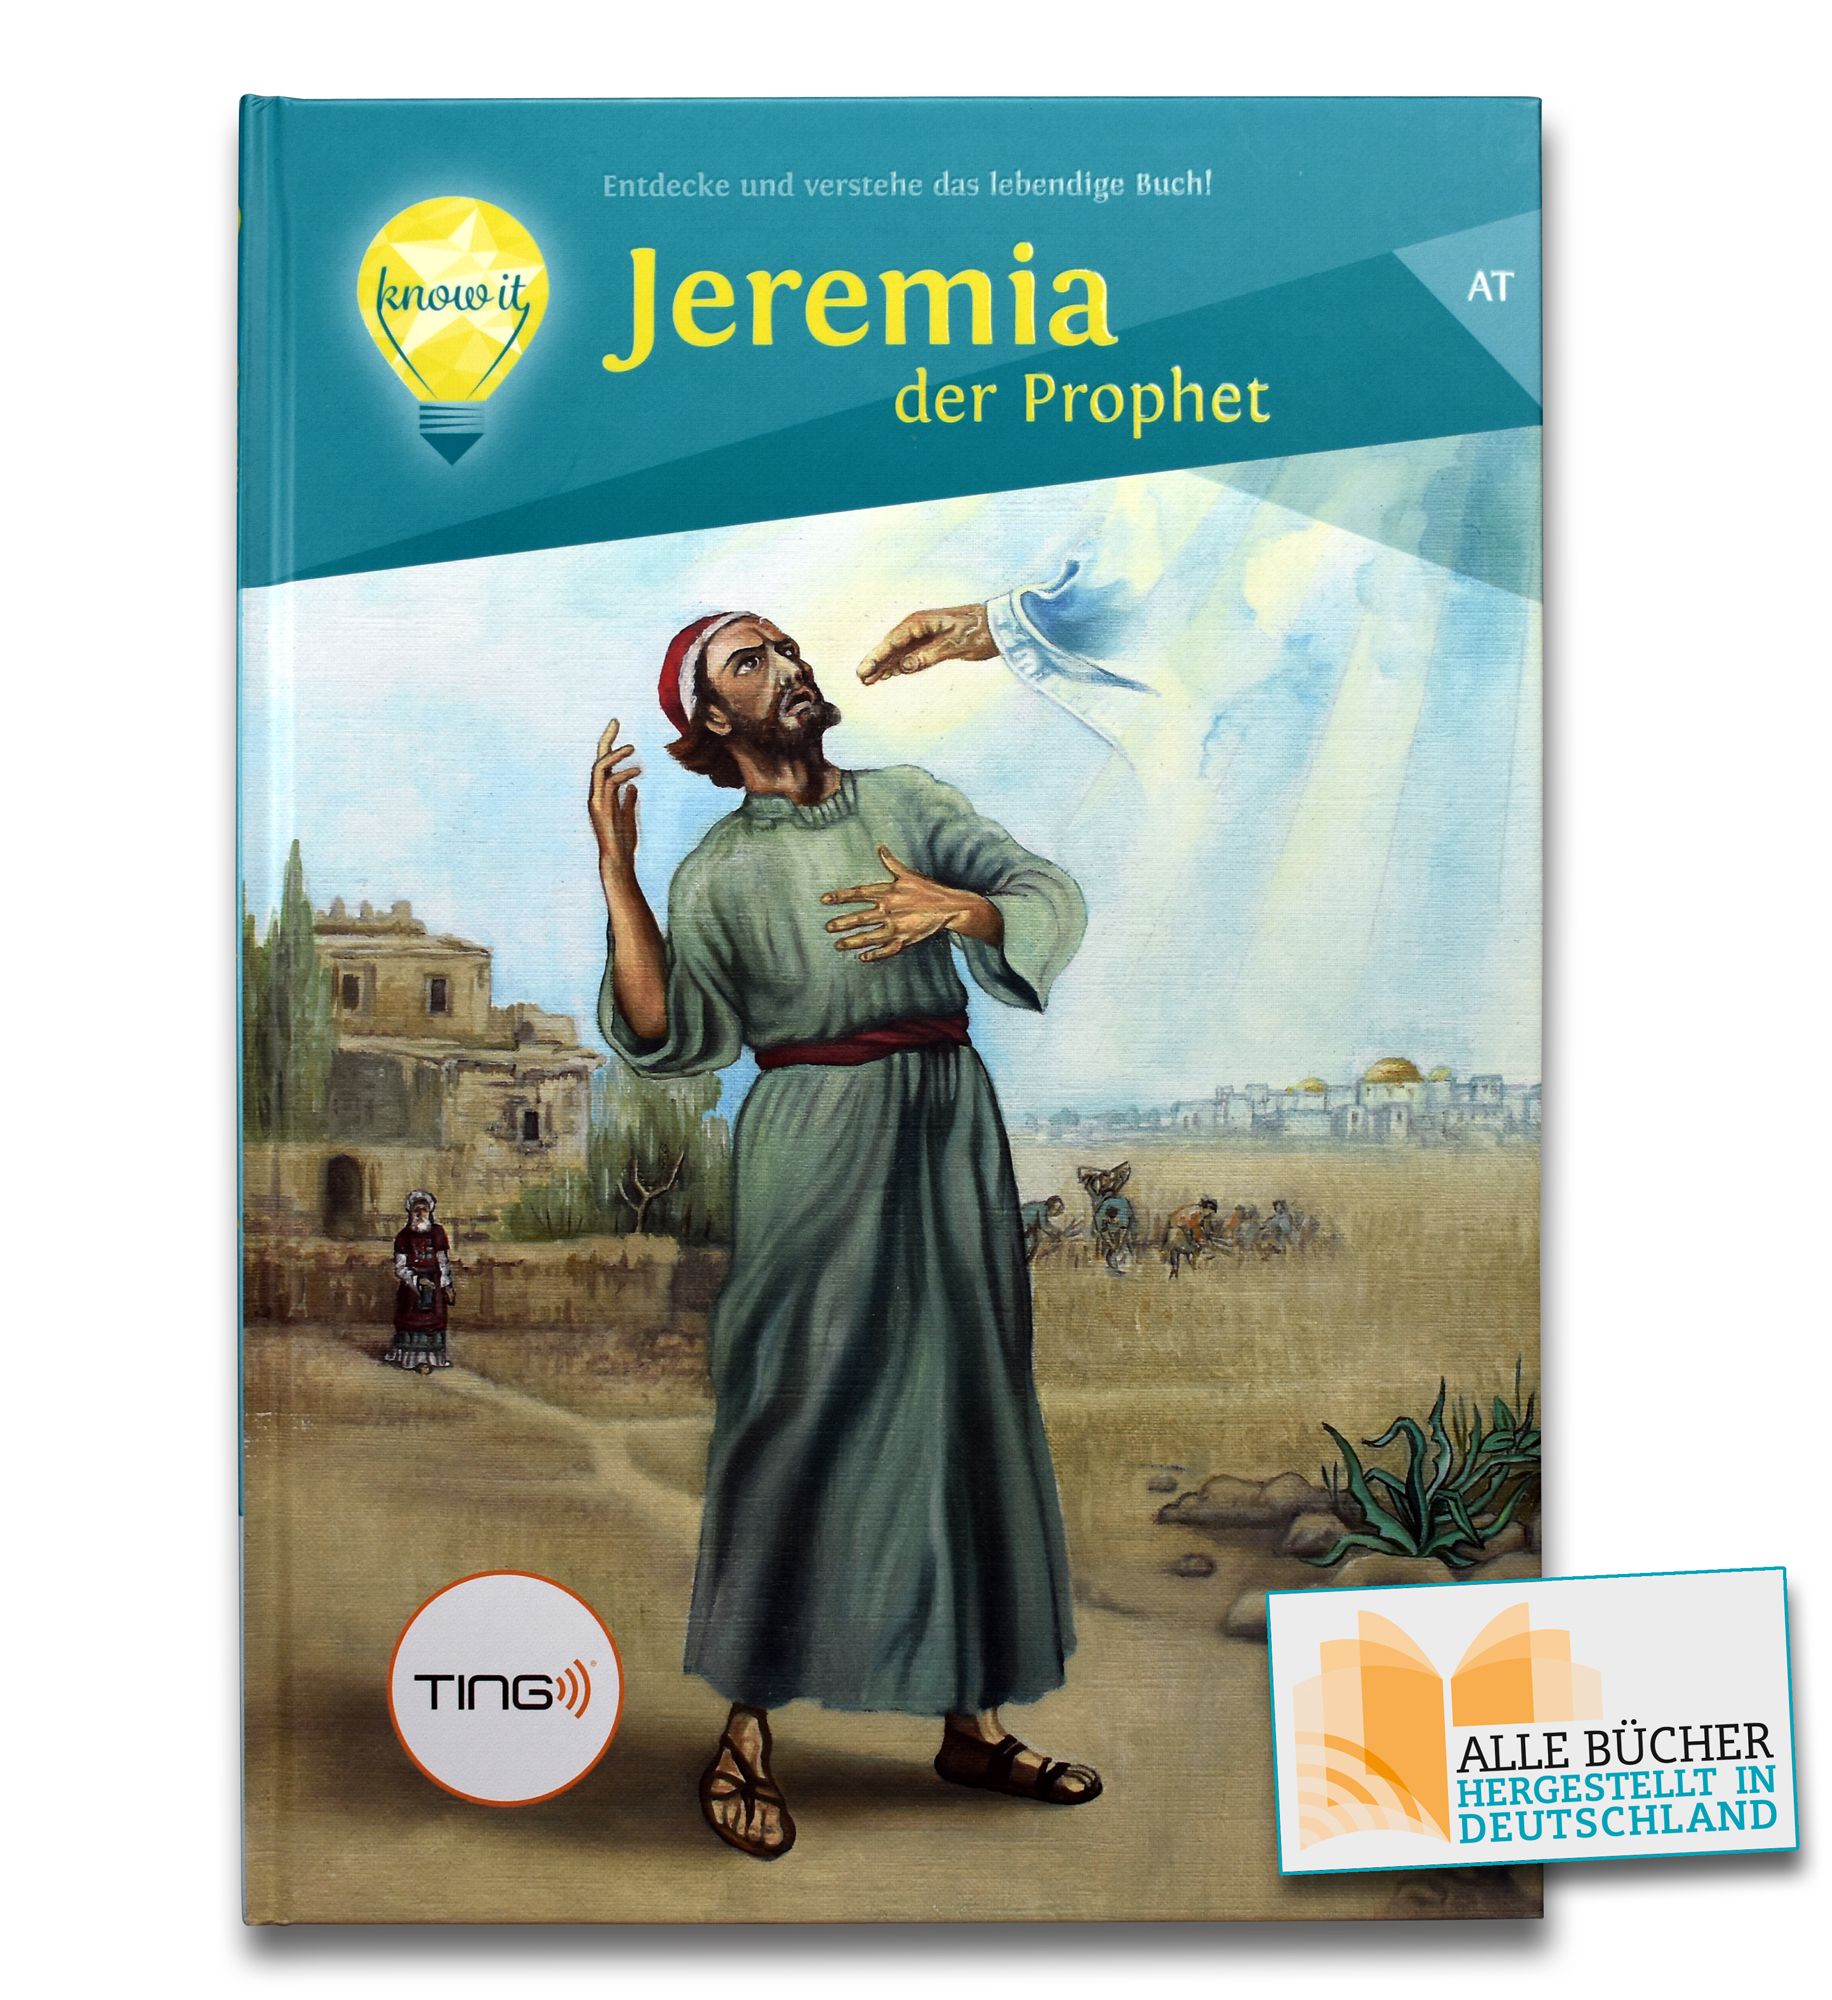 TING Audio-Buch - Jeremia der Prophet AT